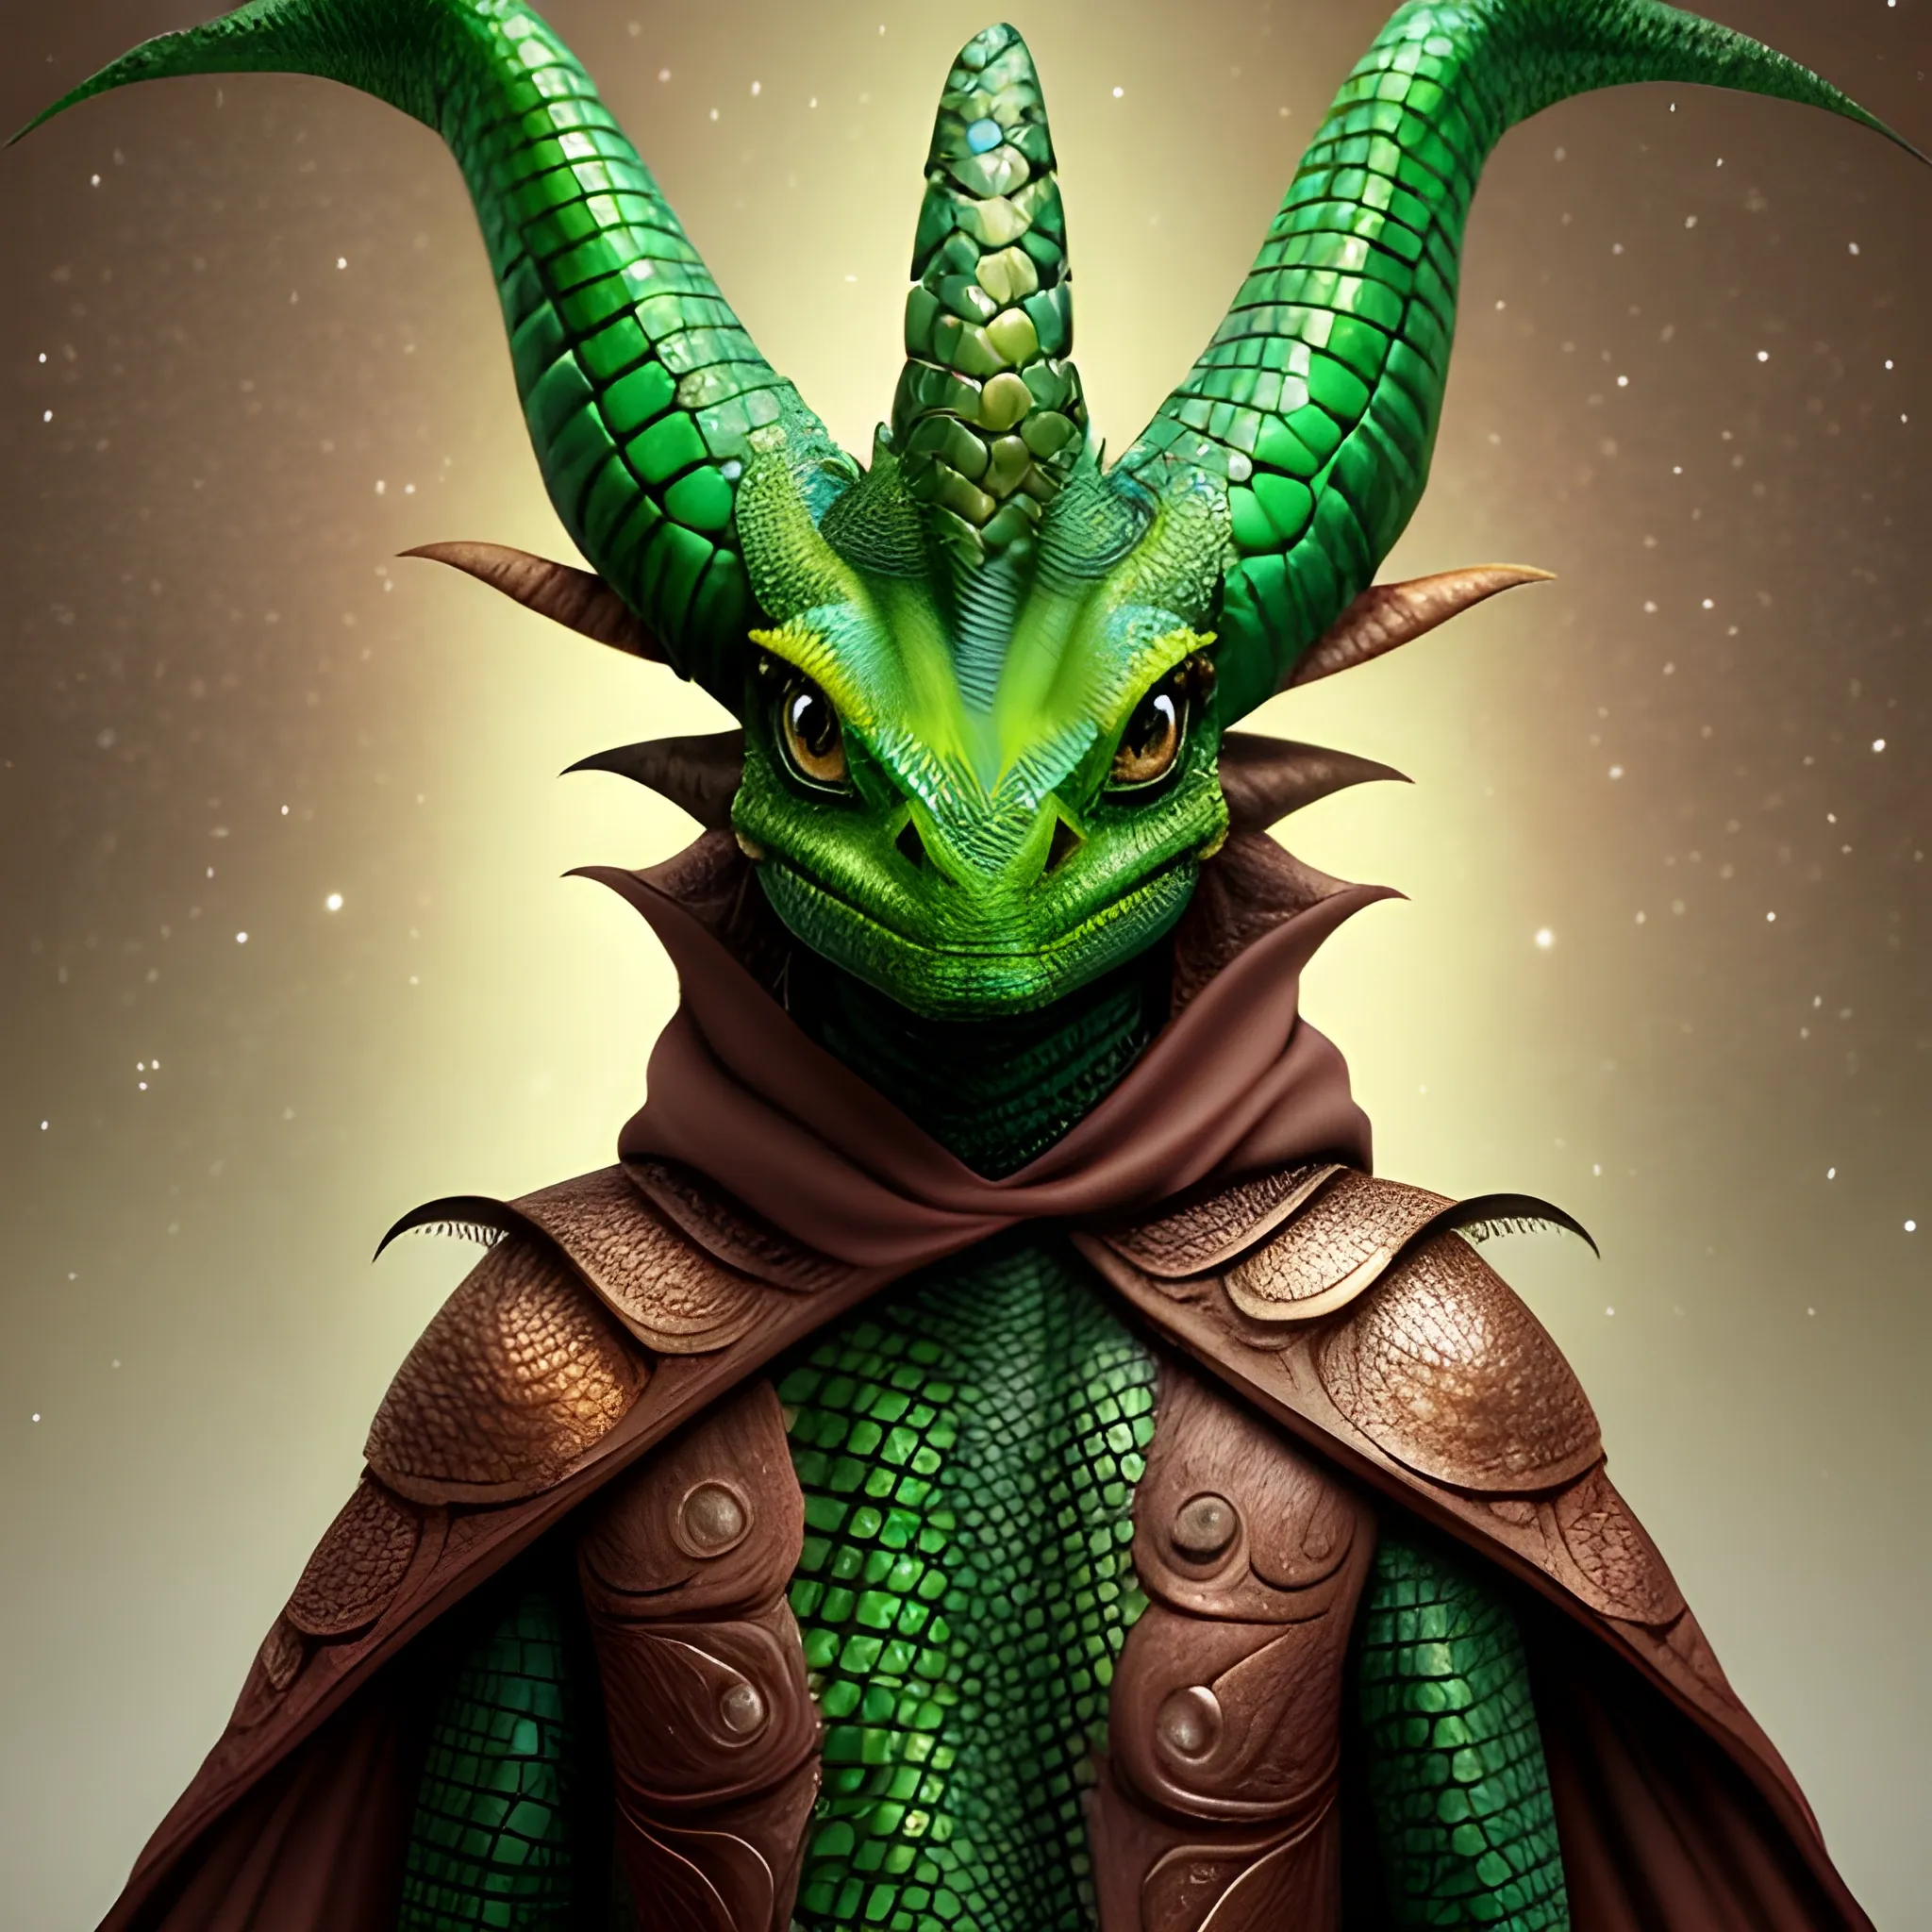 Humanoid dragon looking at the camera. He has copper scales and green eyes. He is wearing a simple cloak that has stars on it. He does not have horns, and has a more lizard like face. Fantasy